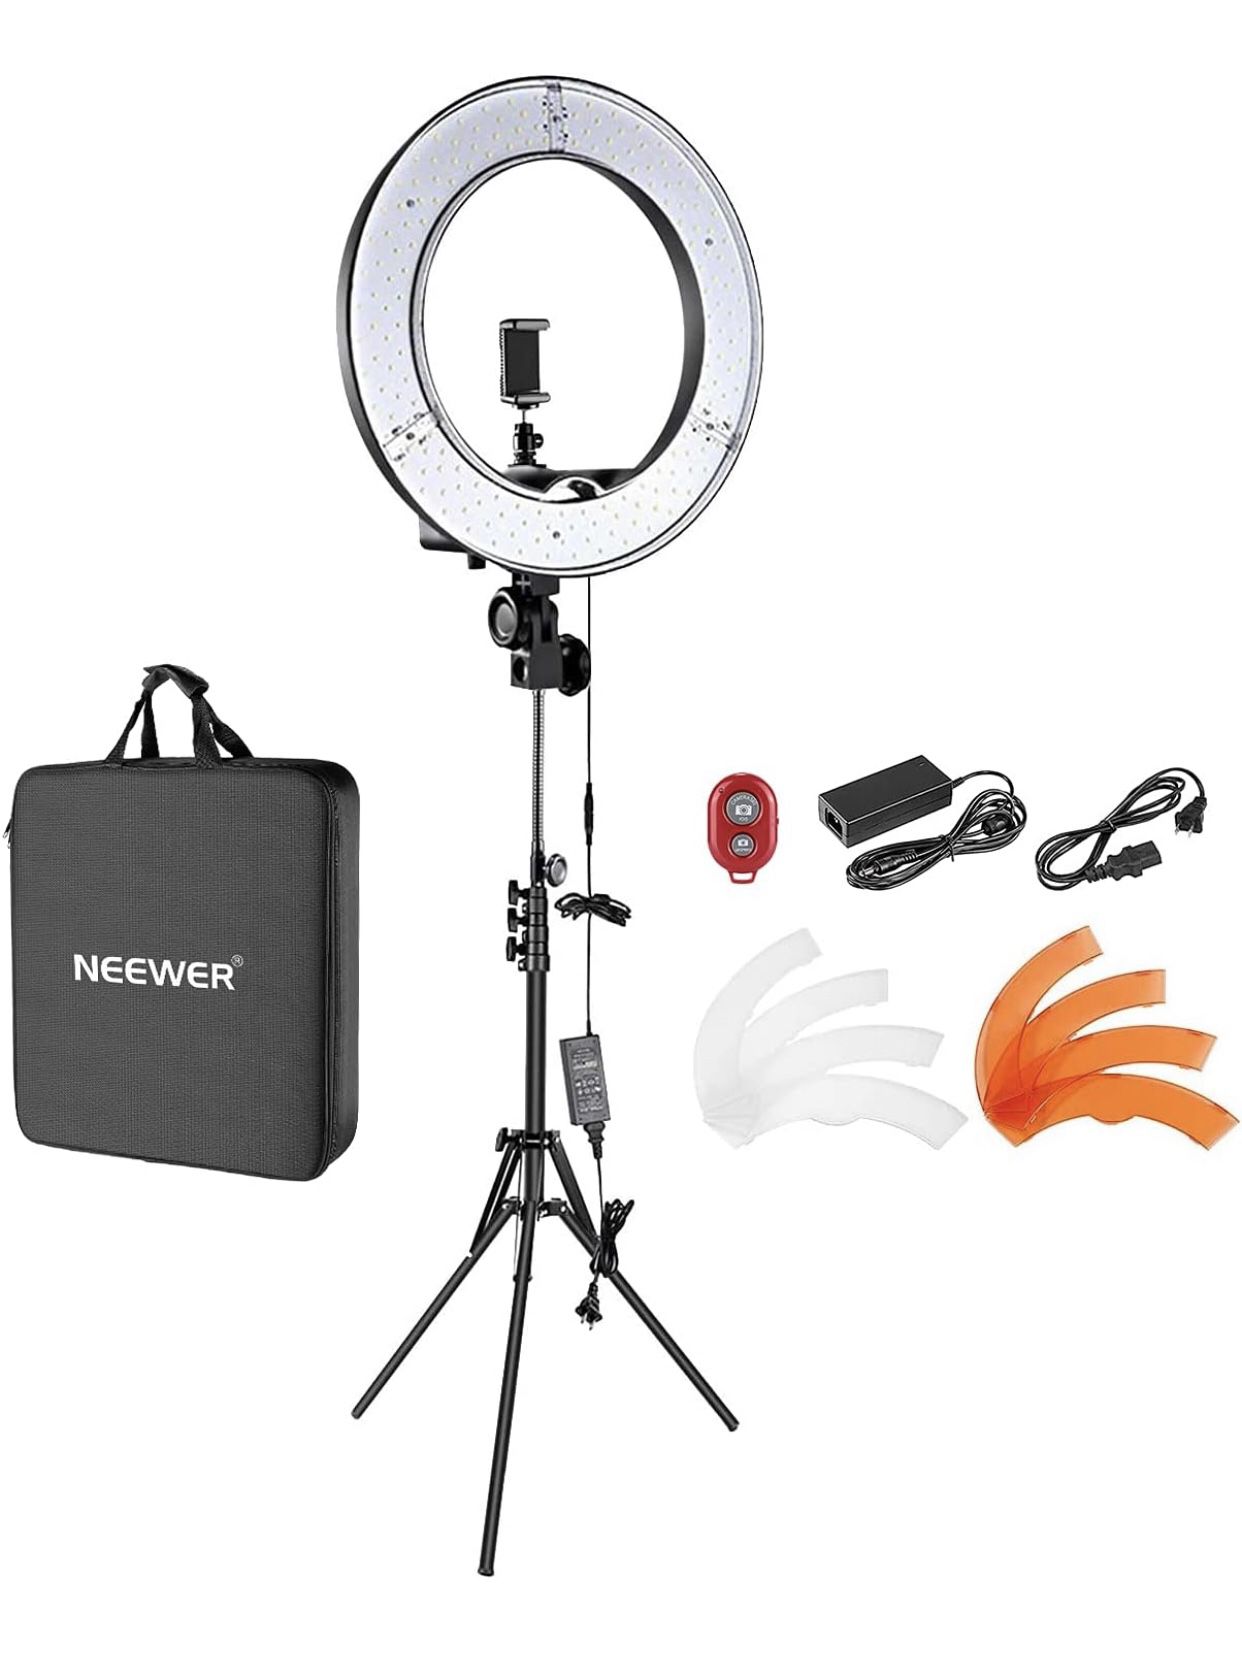 NEW! Neewer 18"/48cm LED Ring Light: 52W Dimmable LED Ringlight Makeup Selfie Light Ring with Stand